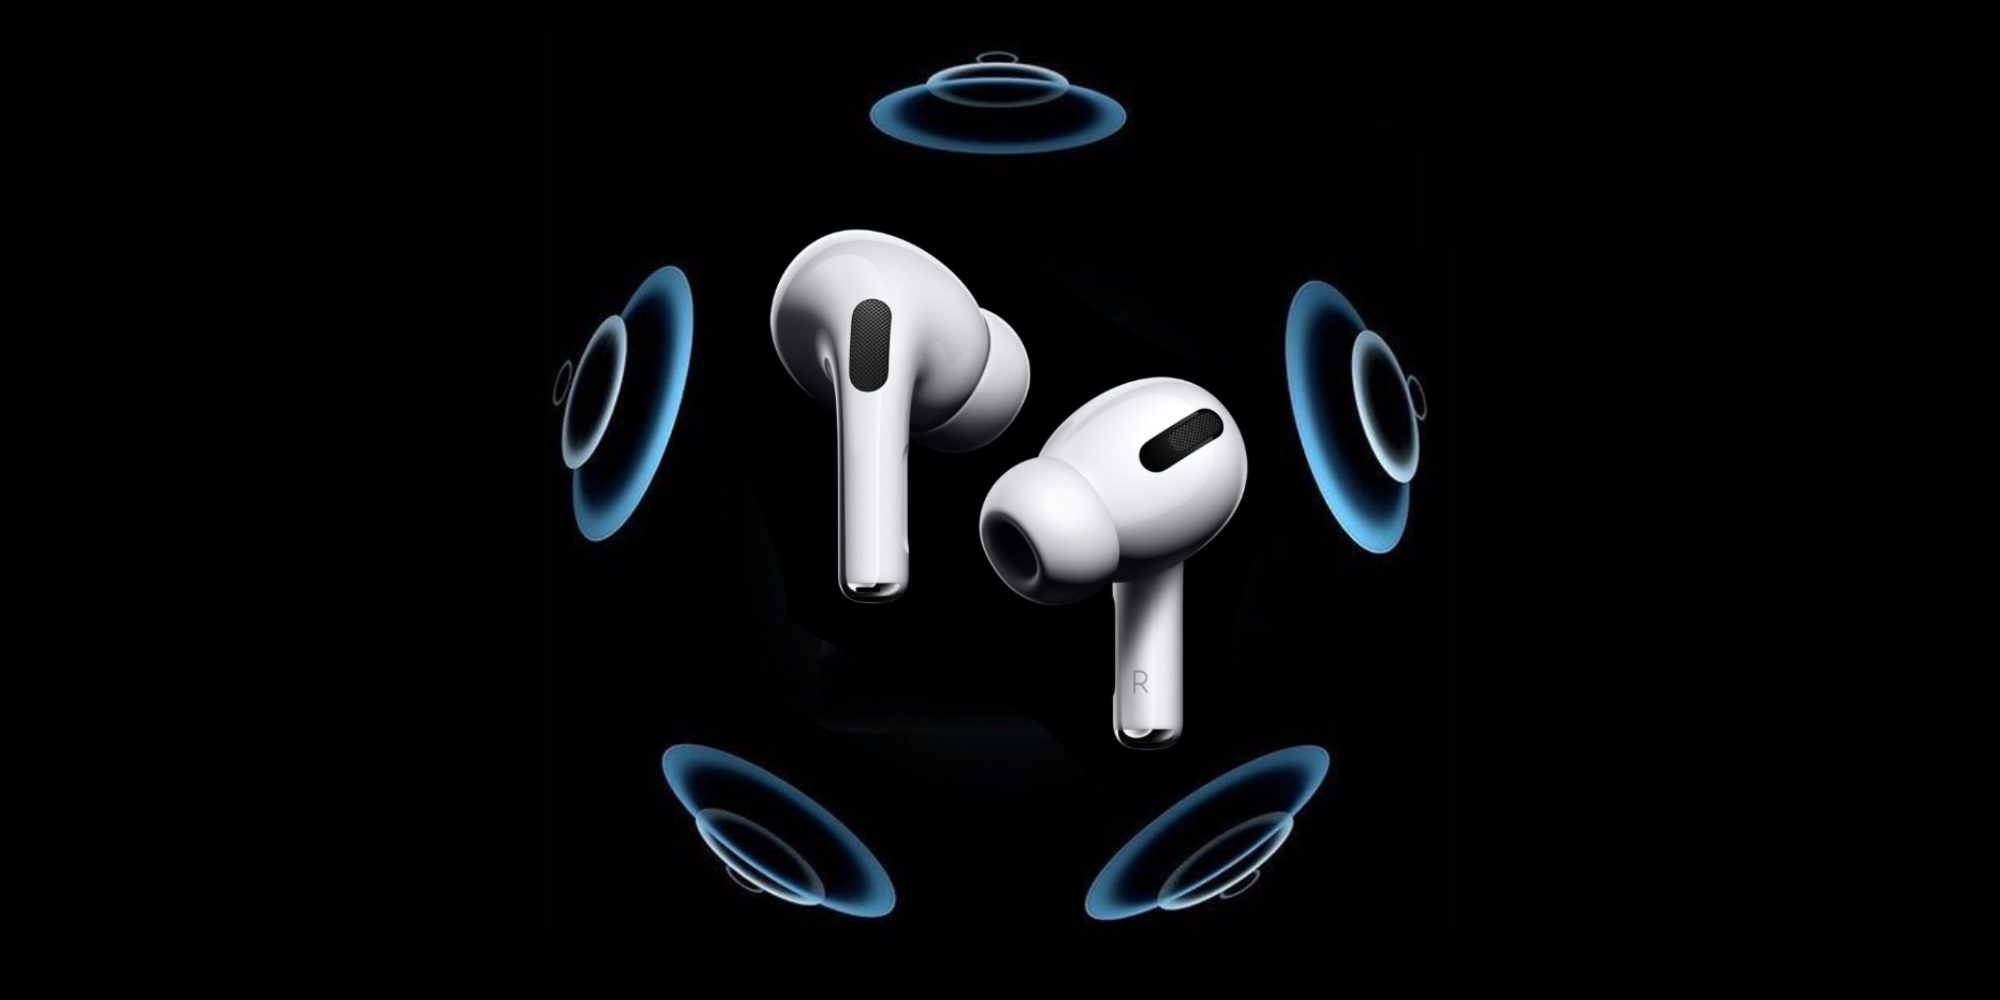 What Is Spatial Audio And How To Use It On AirPods Pro And AirPods Max